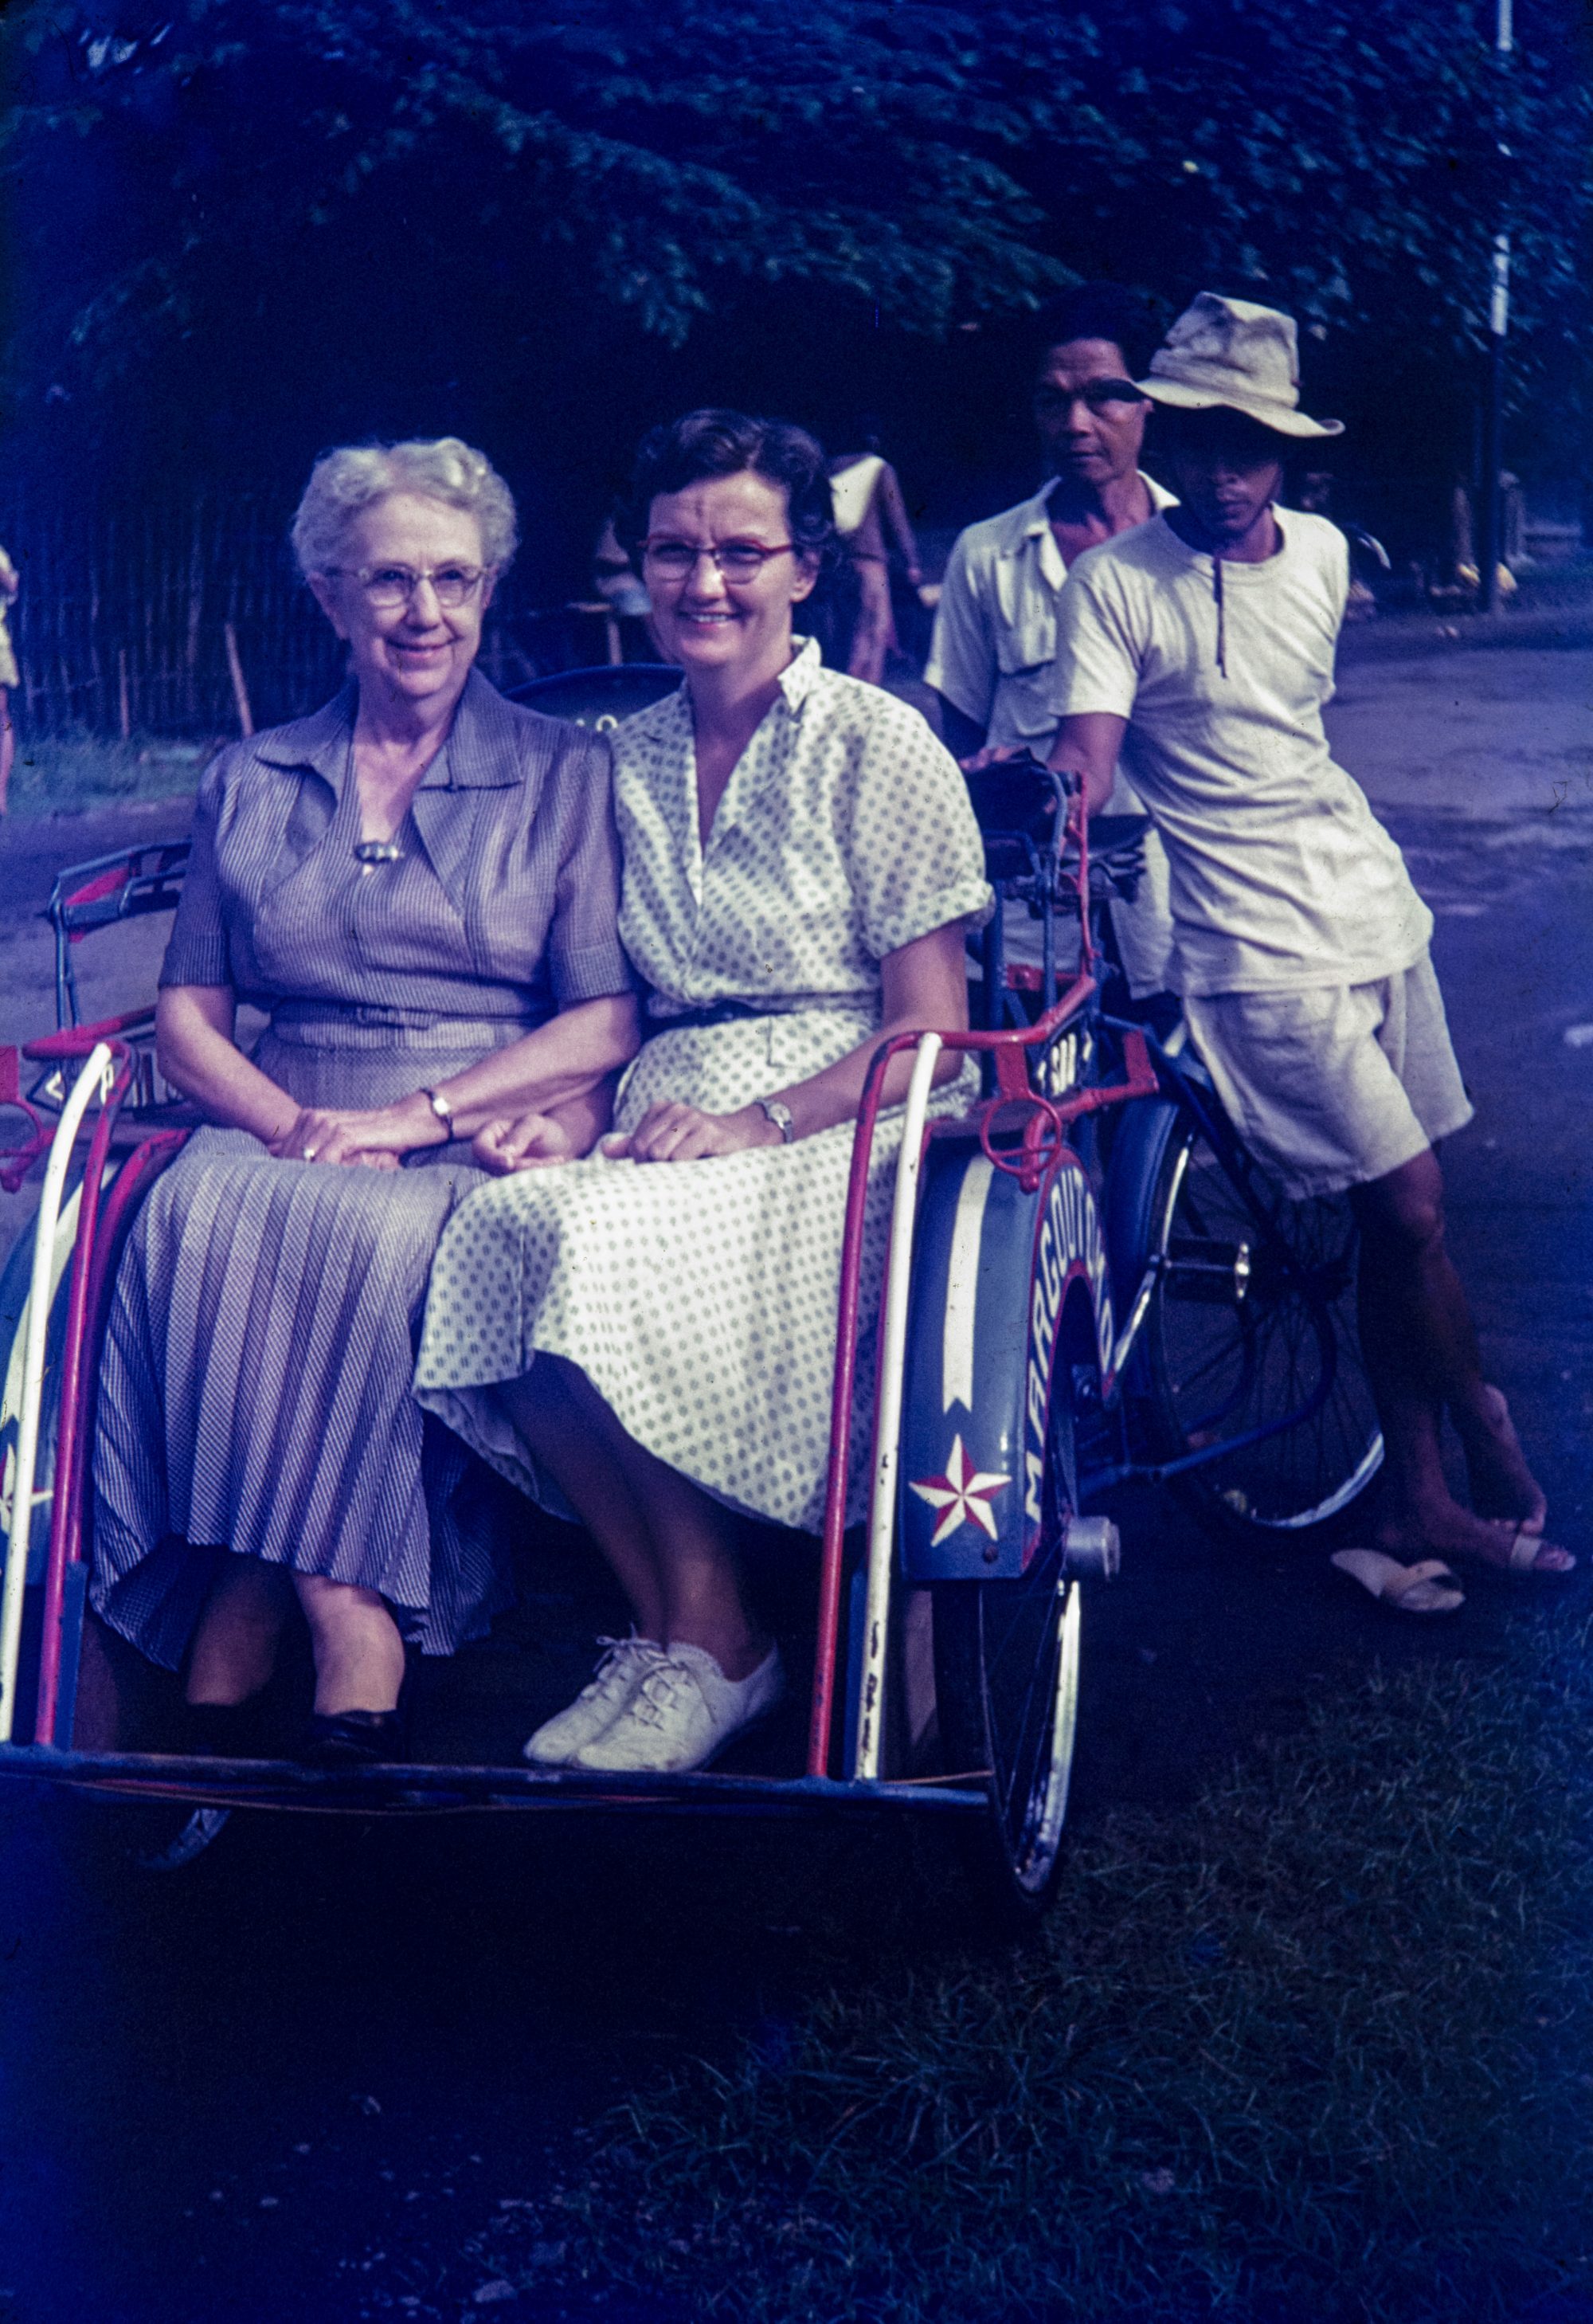 Catherine Walker and her mother, Clara, ride a local form of transport in Kediri, Indonesia, in 1955.